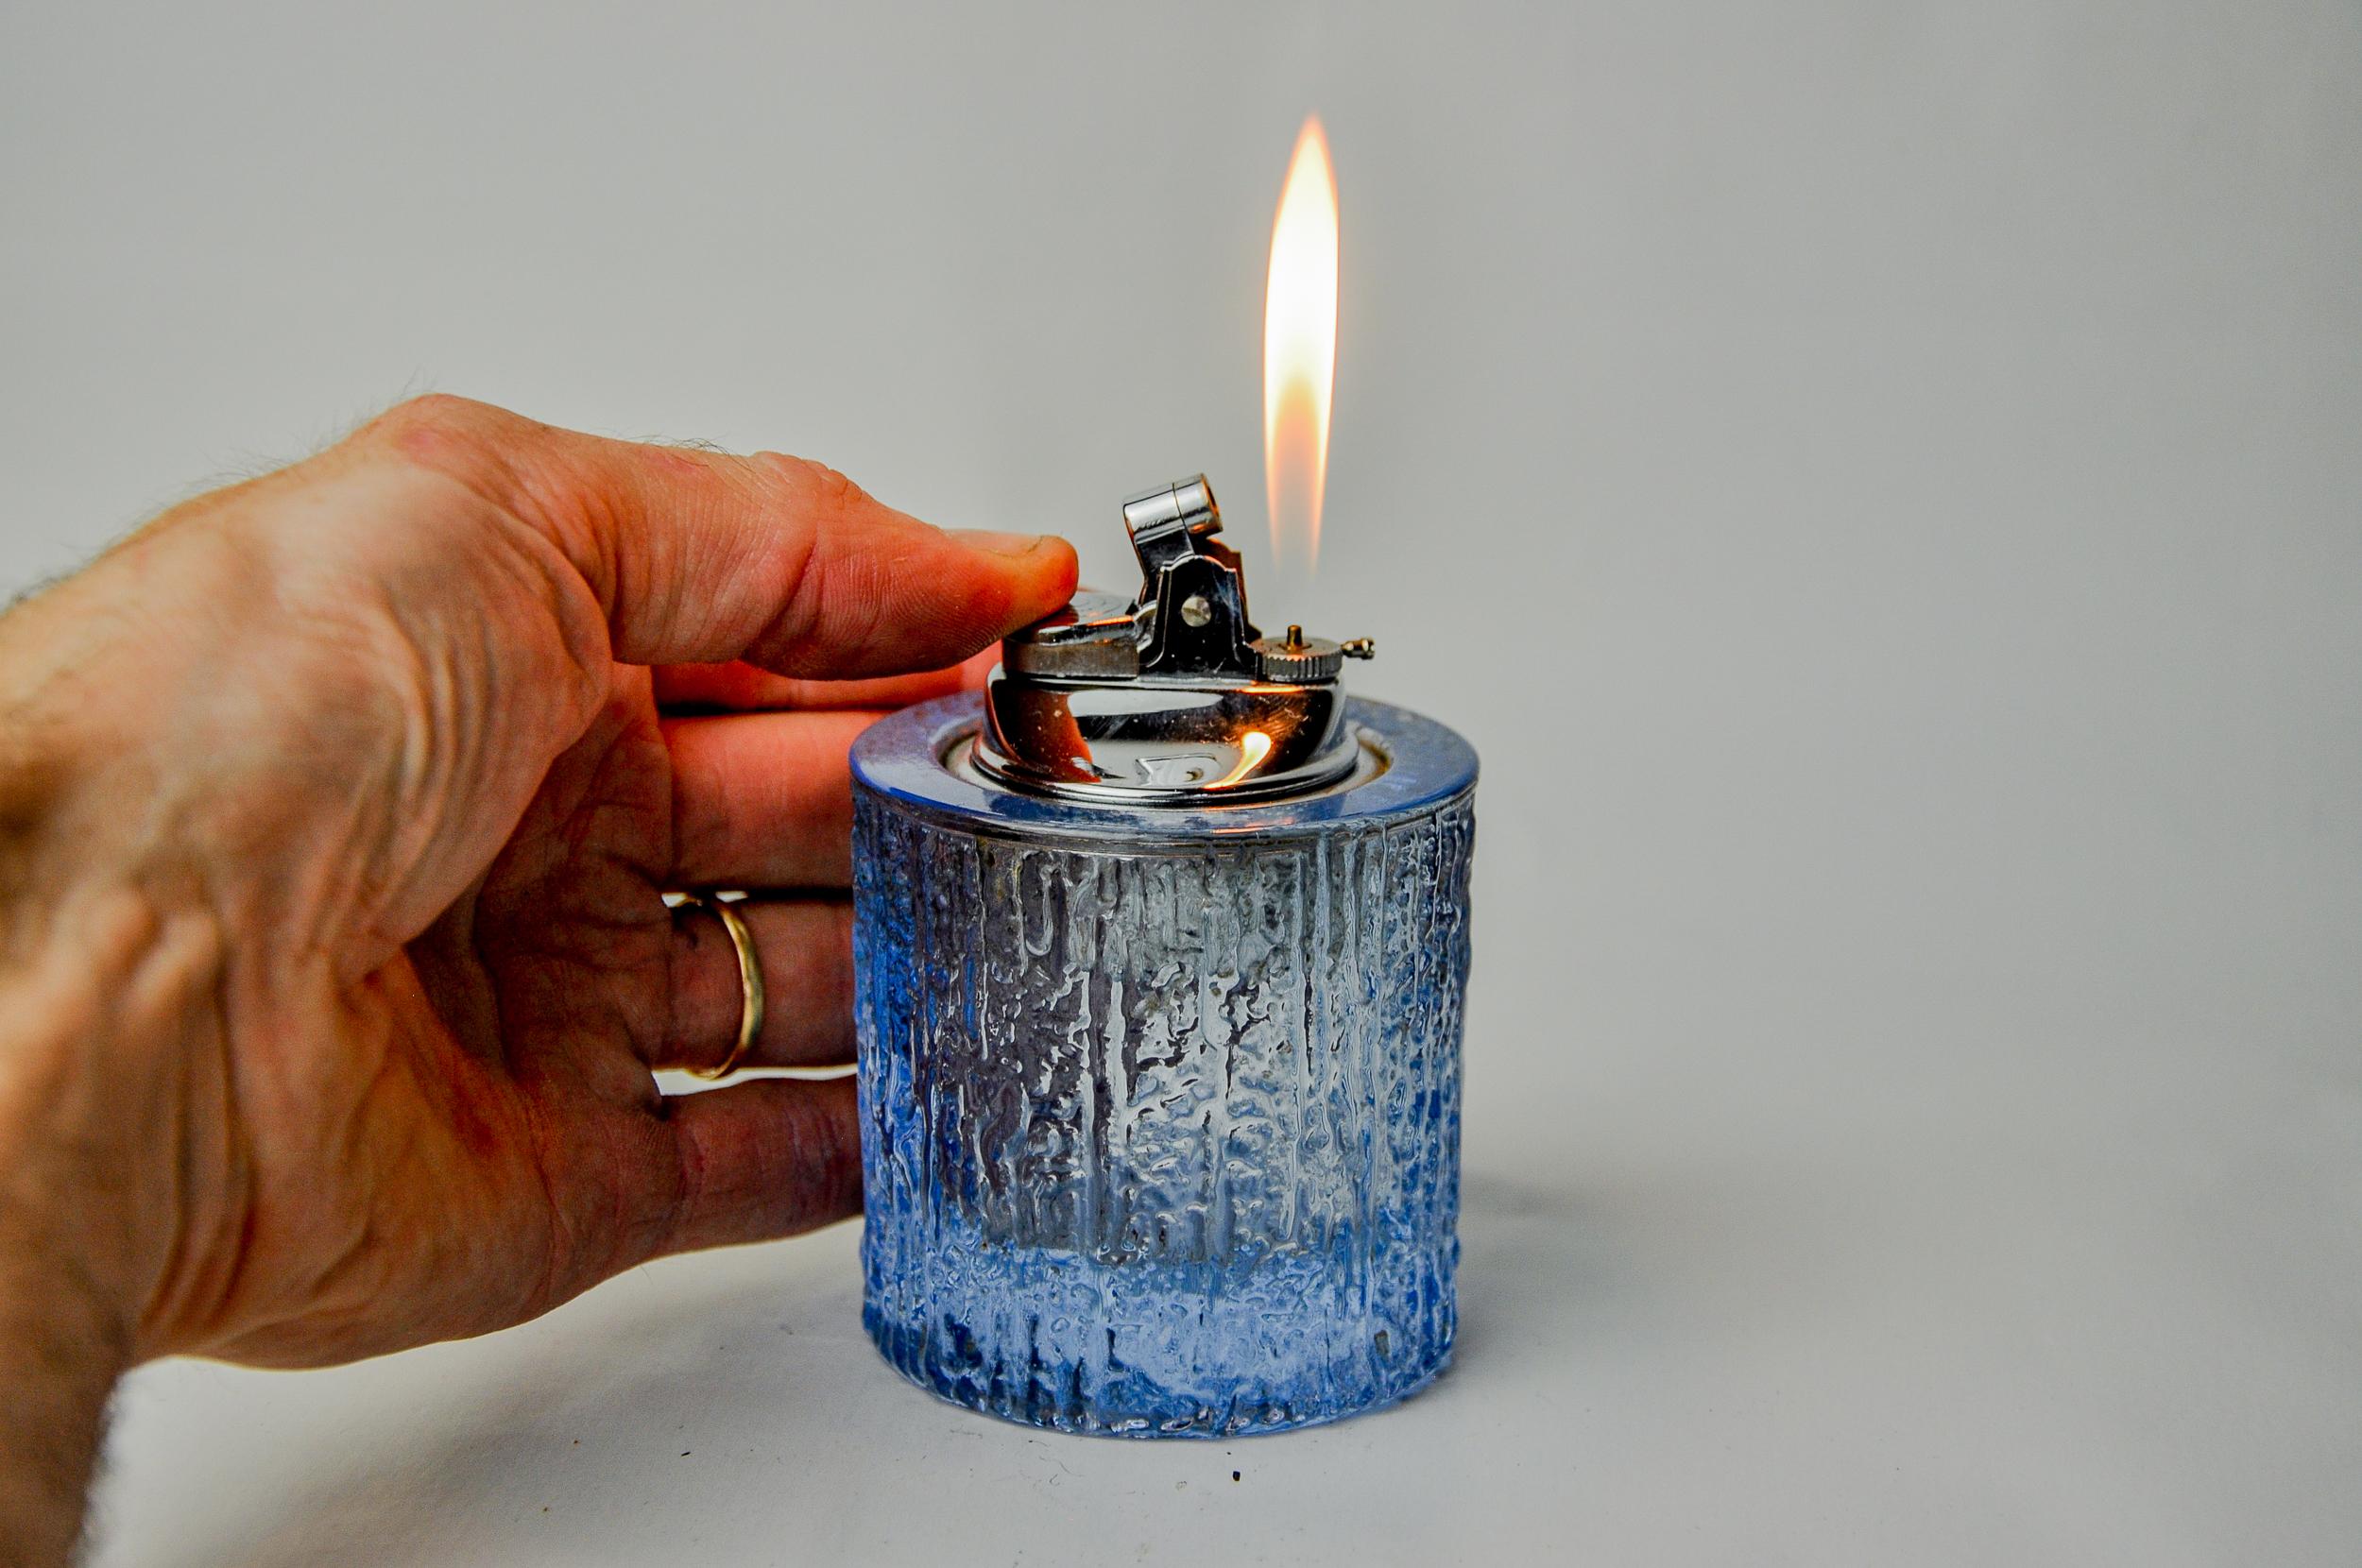 Superb circular ice lighter designed and produced by antonio imperatore in italy in the 1970s. Blue murano glass lighter with a magnifying effect on its facets, handcrafted by venetian master glassmakers. Decorative object that will bring a real